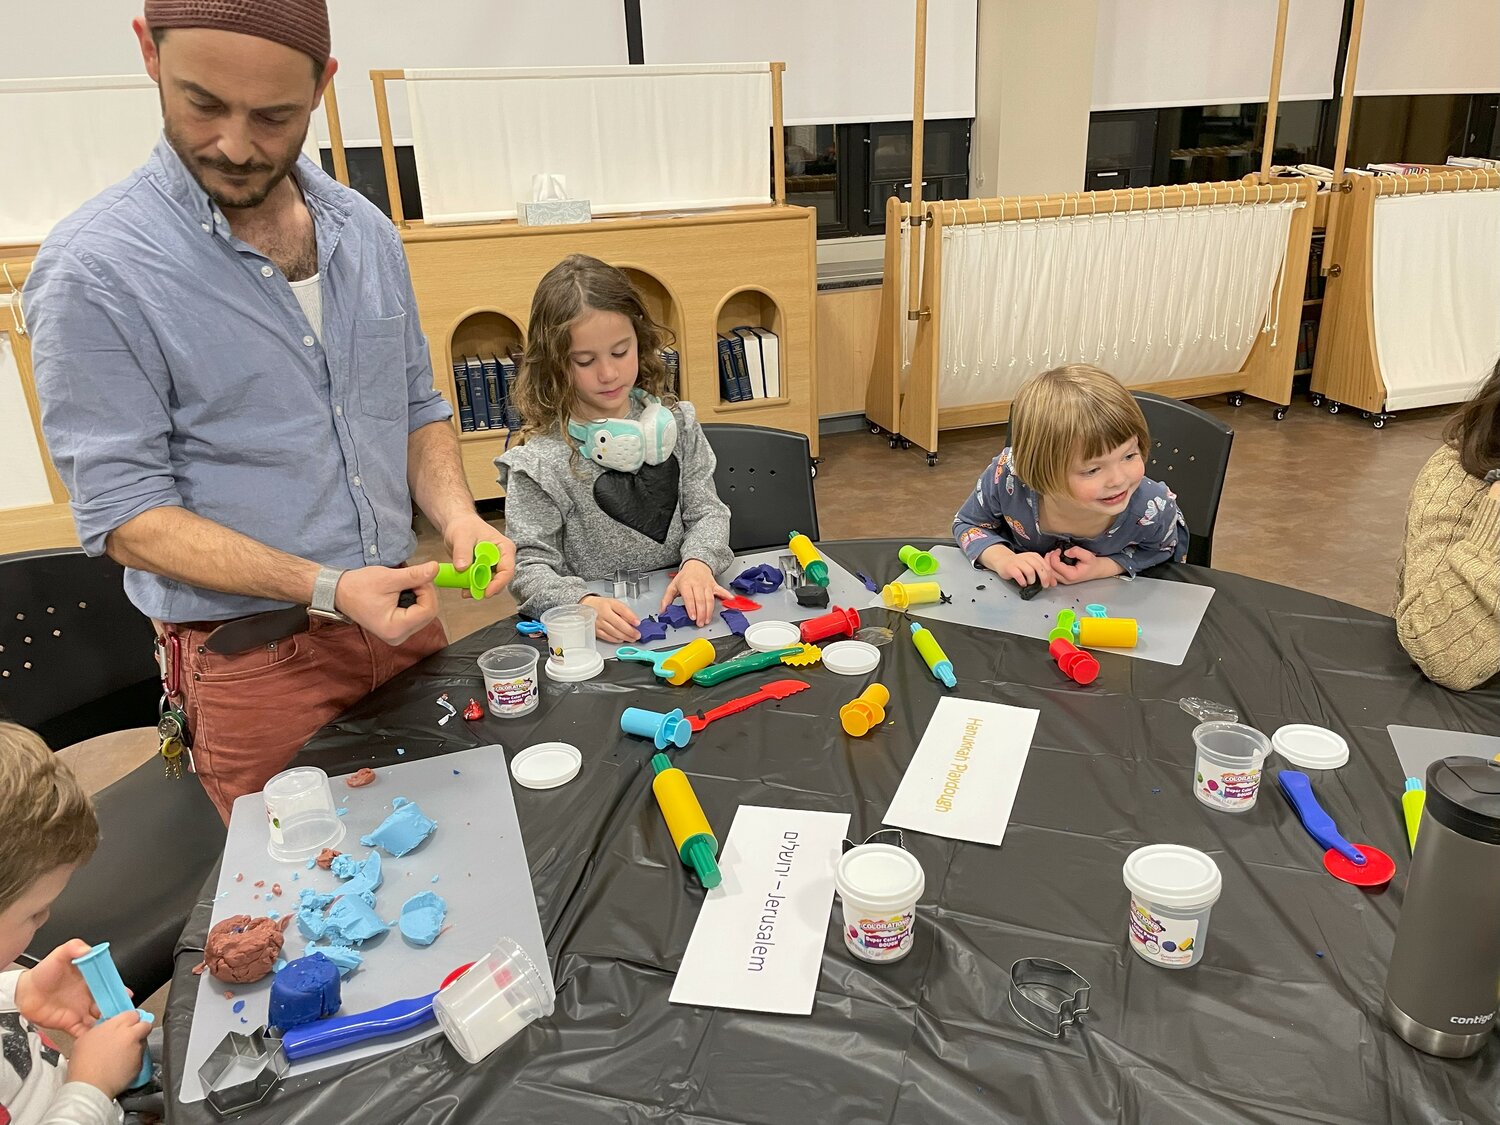 Families make playdough at a Hanukkah event sponsored by the Jewish Alliance of Greater RI.